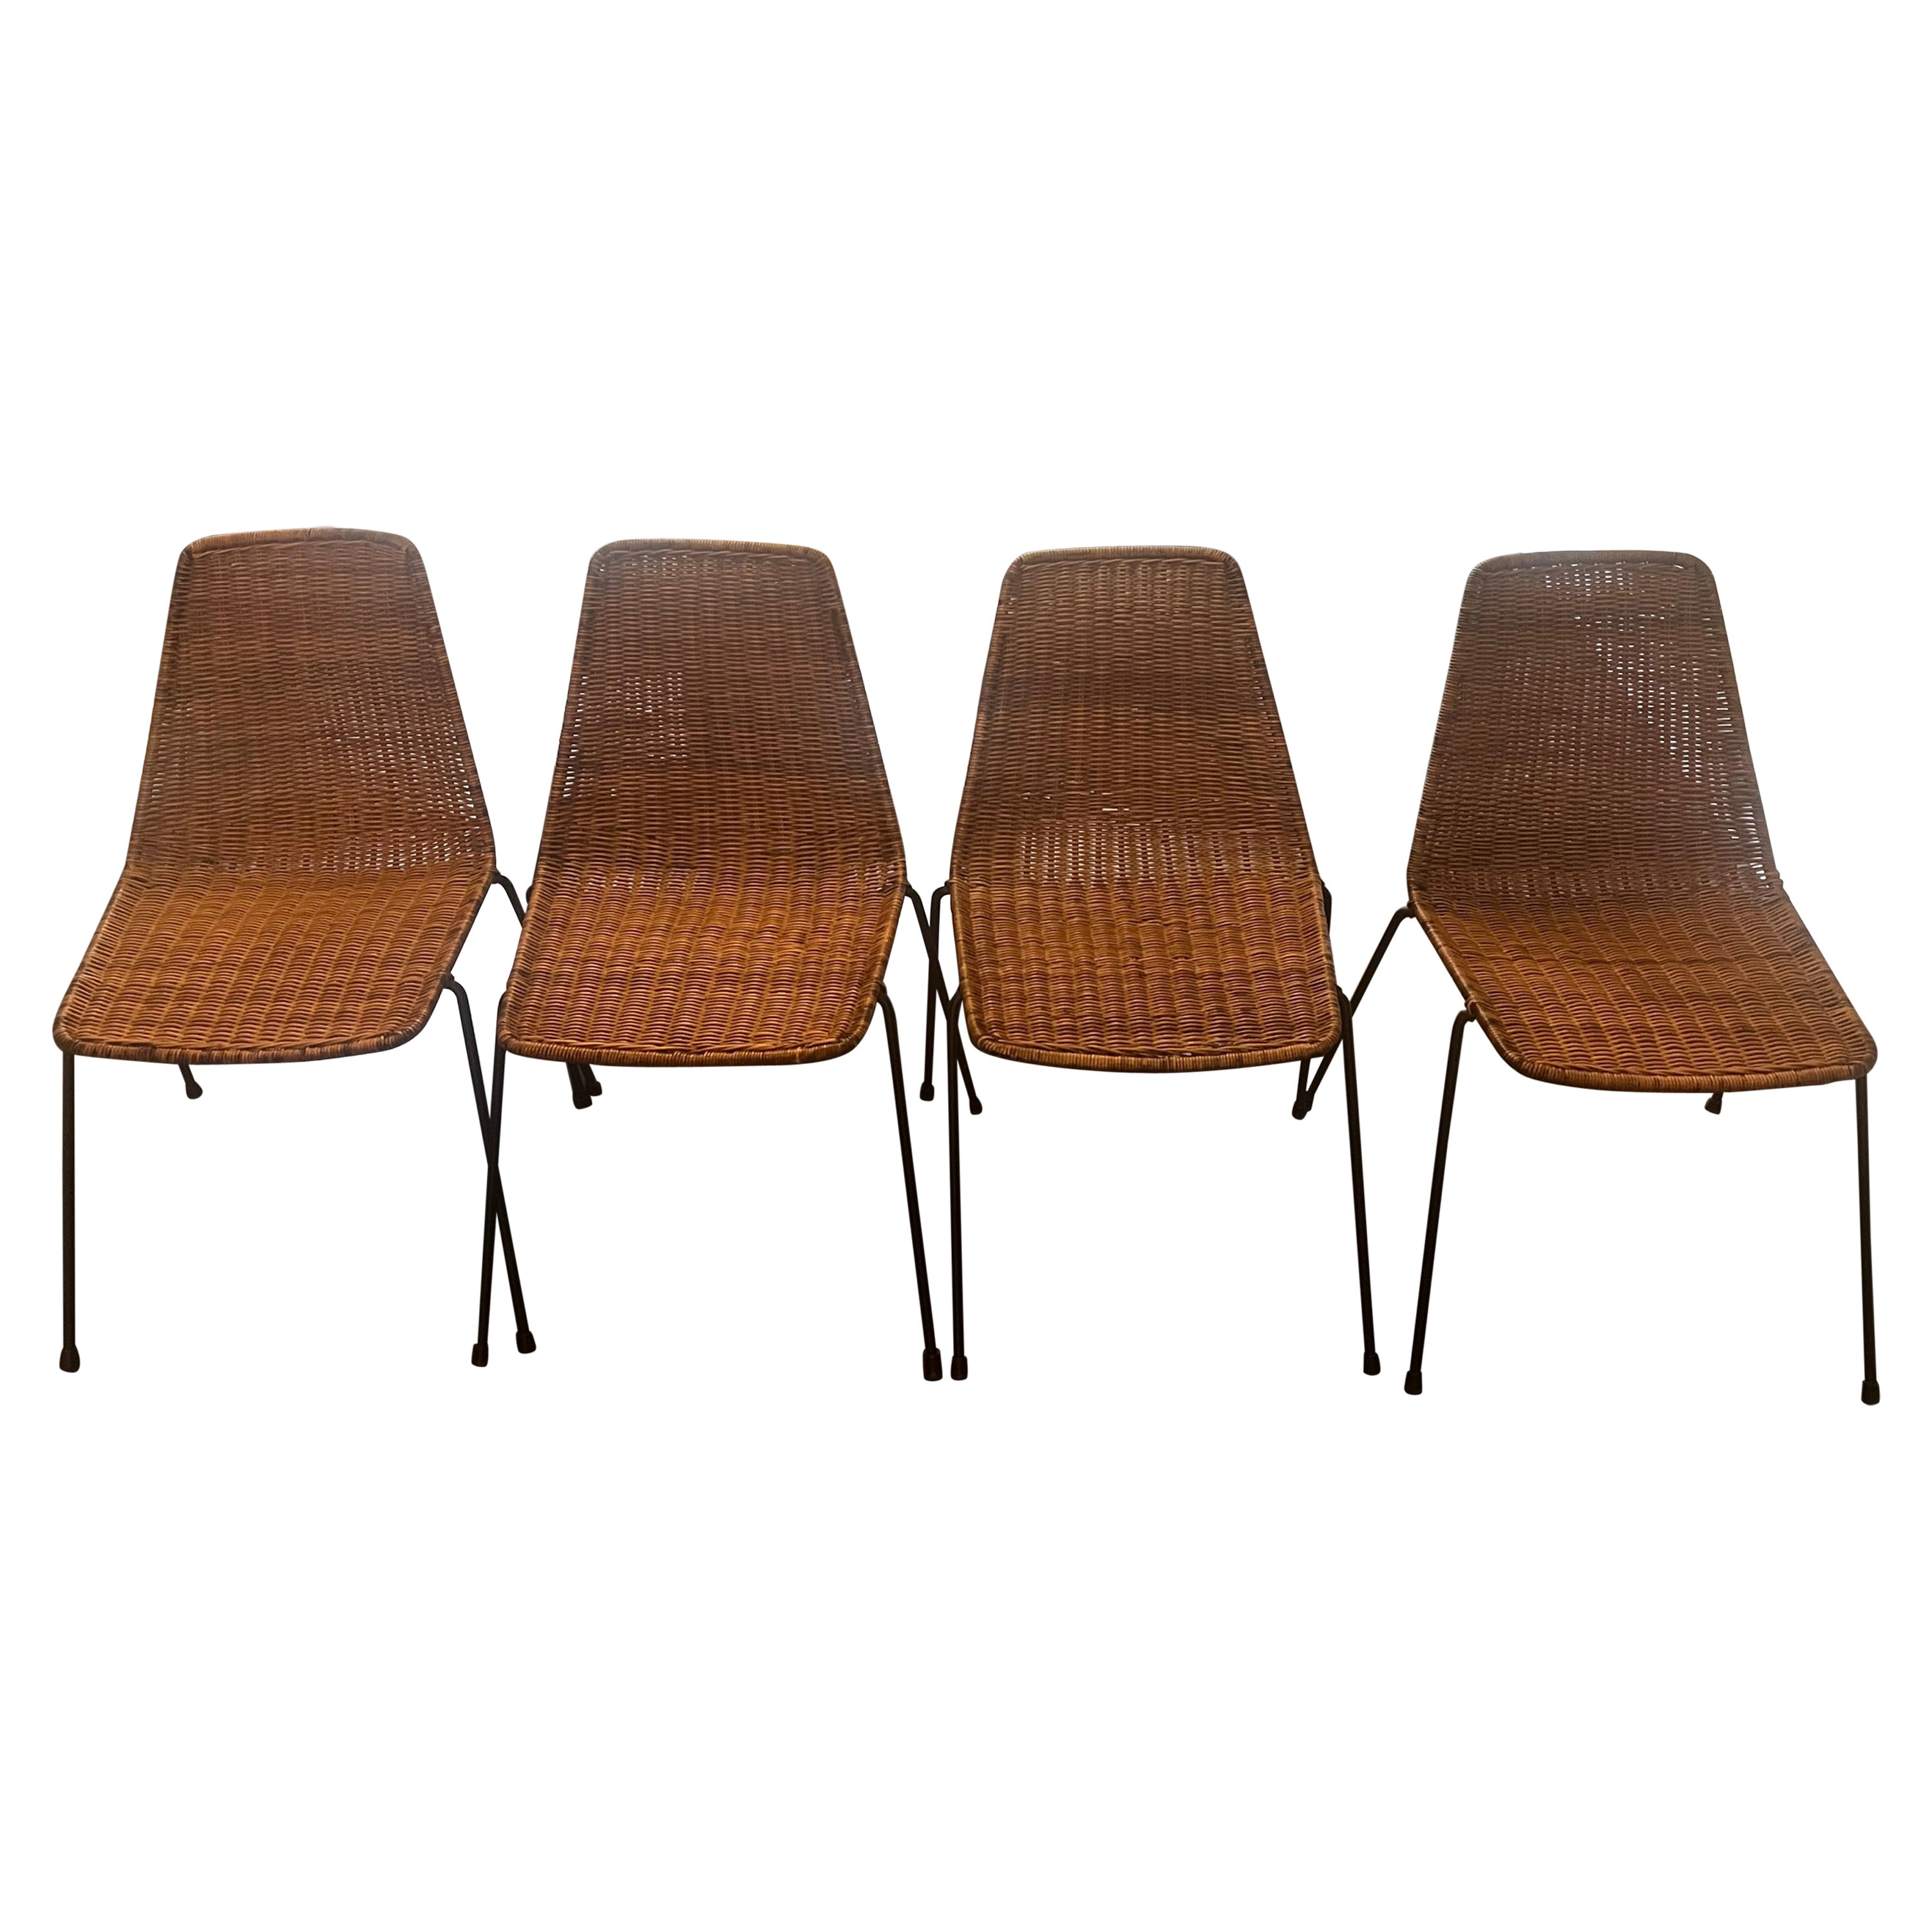 1960s Italian Wicker Dining Chairs by Gian Franco Legler, Set of 4 For Sale